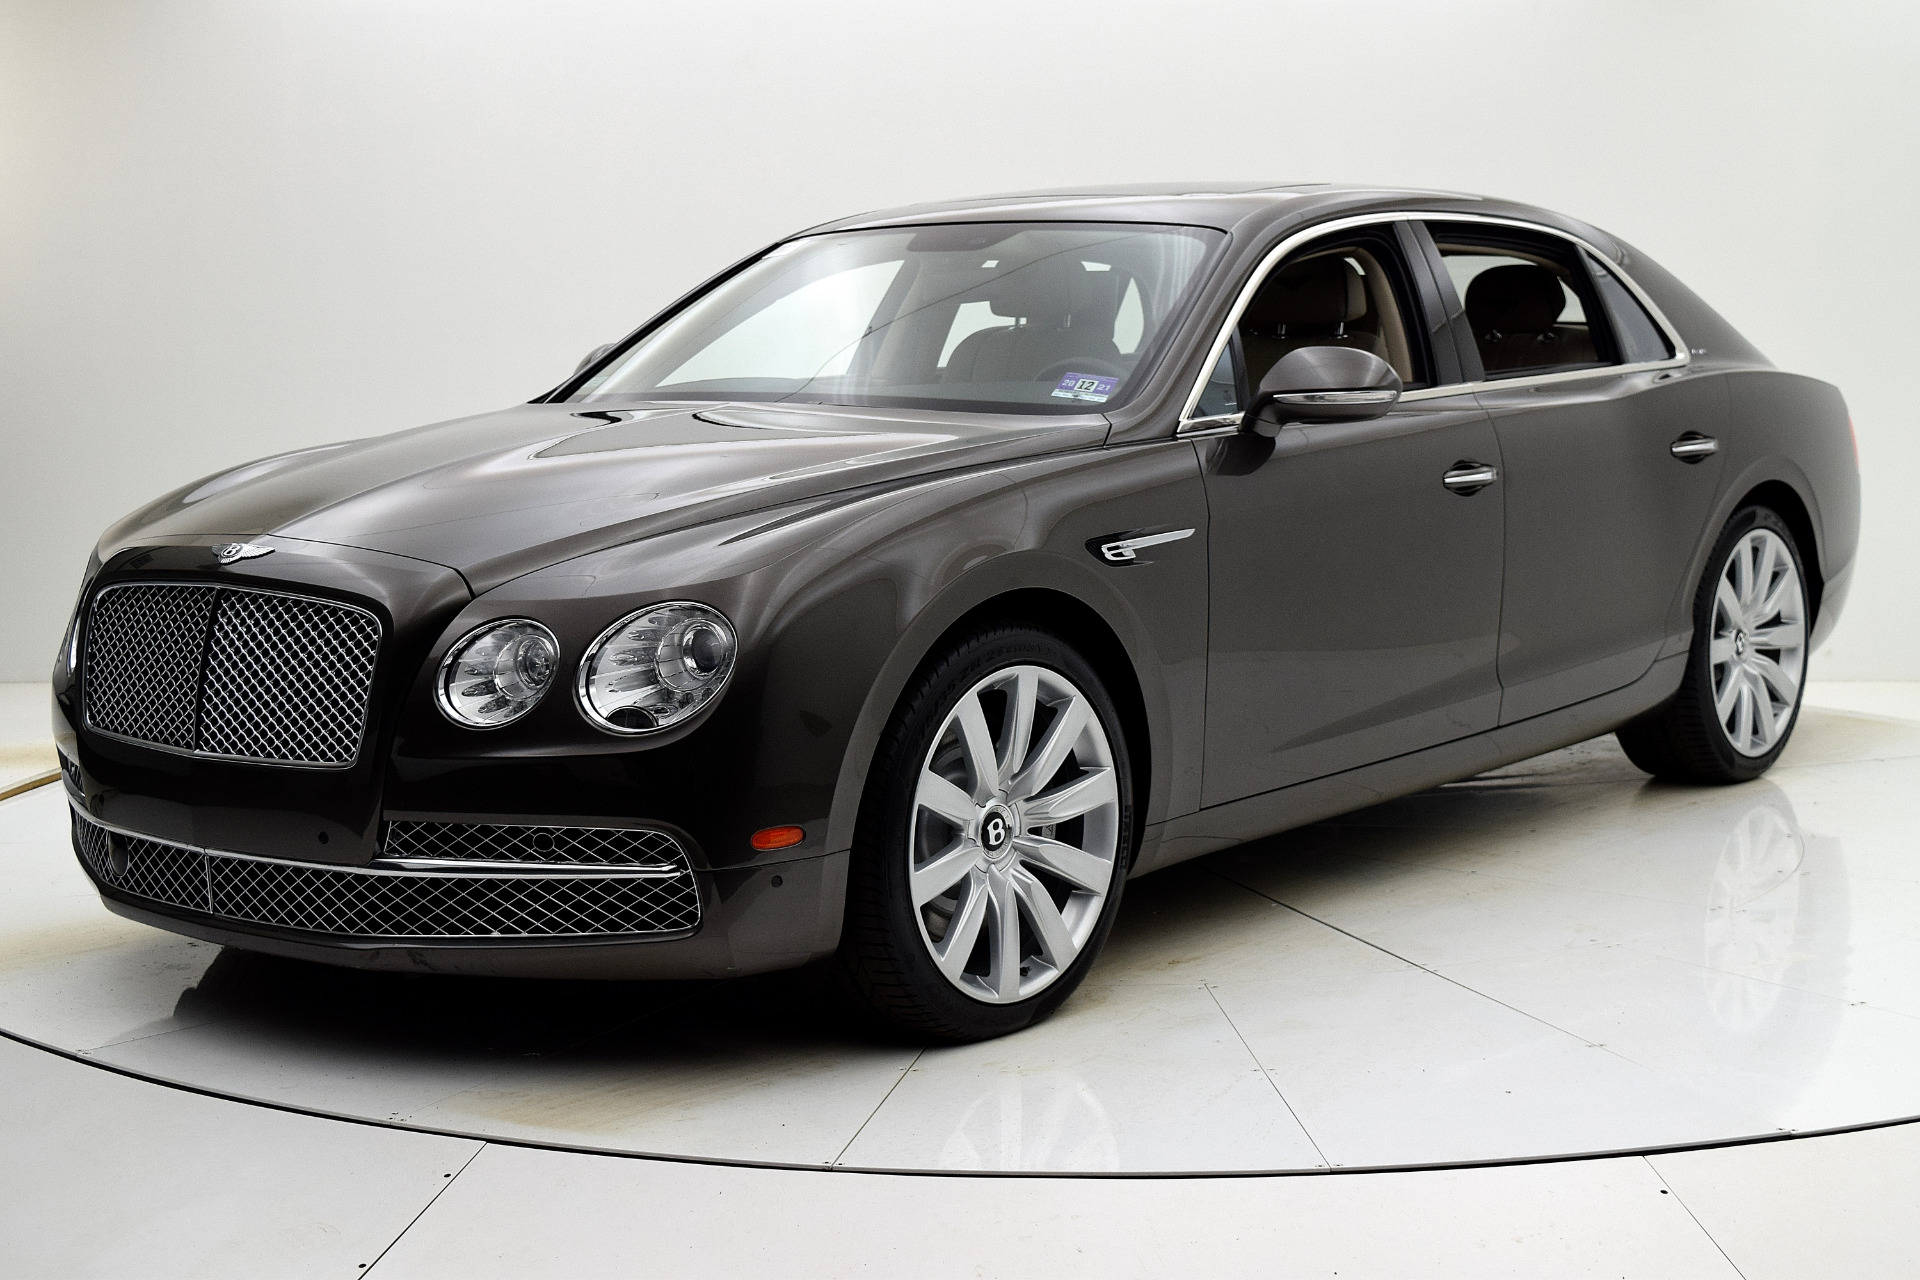 Used 2014 Bentley Flying Spur W12 for sale Sold at Bentley Palmyra N.J. in Palmyra NJ 08065 2